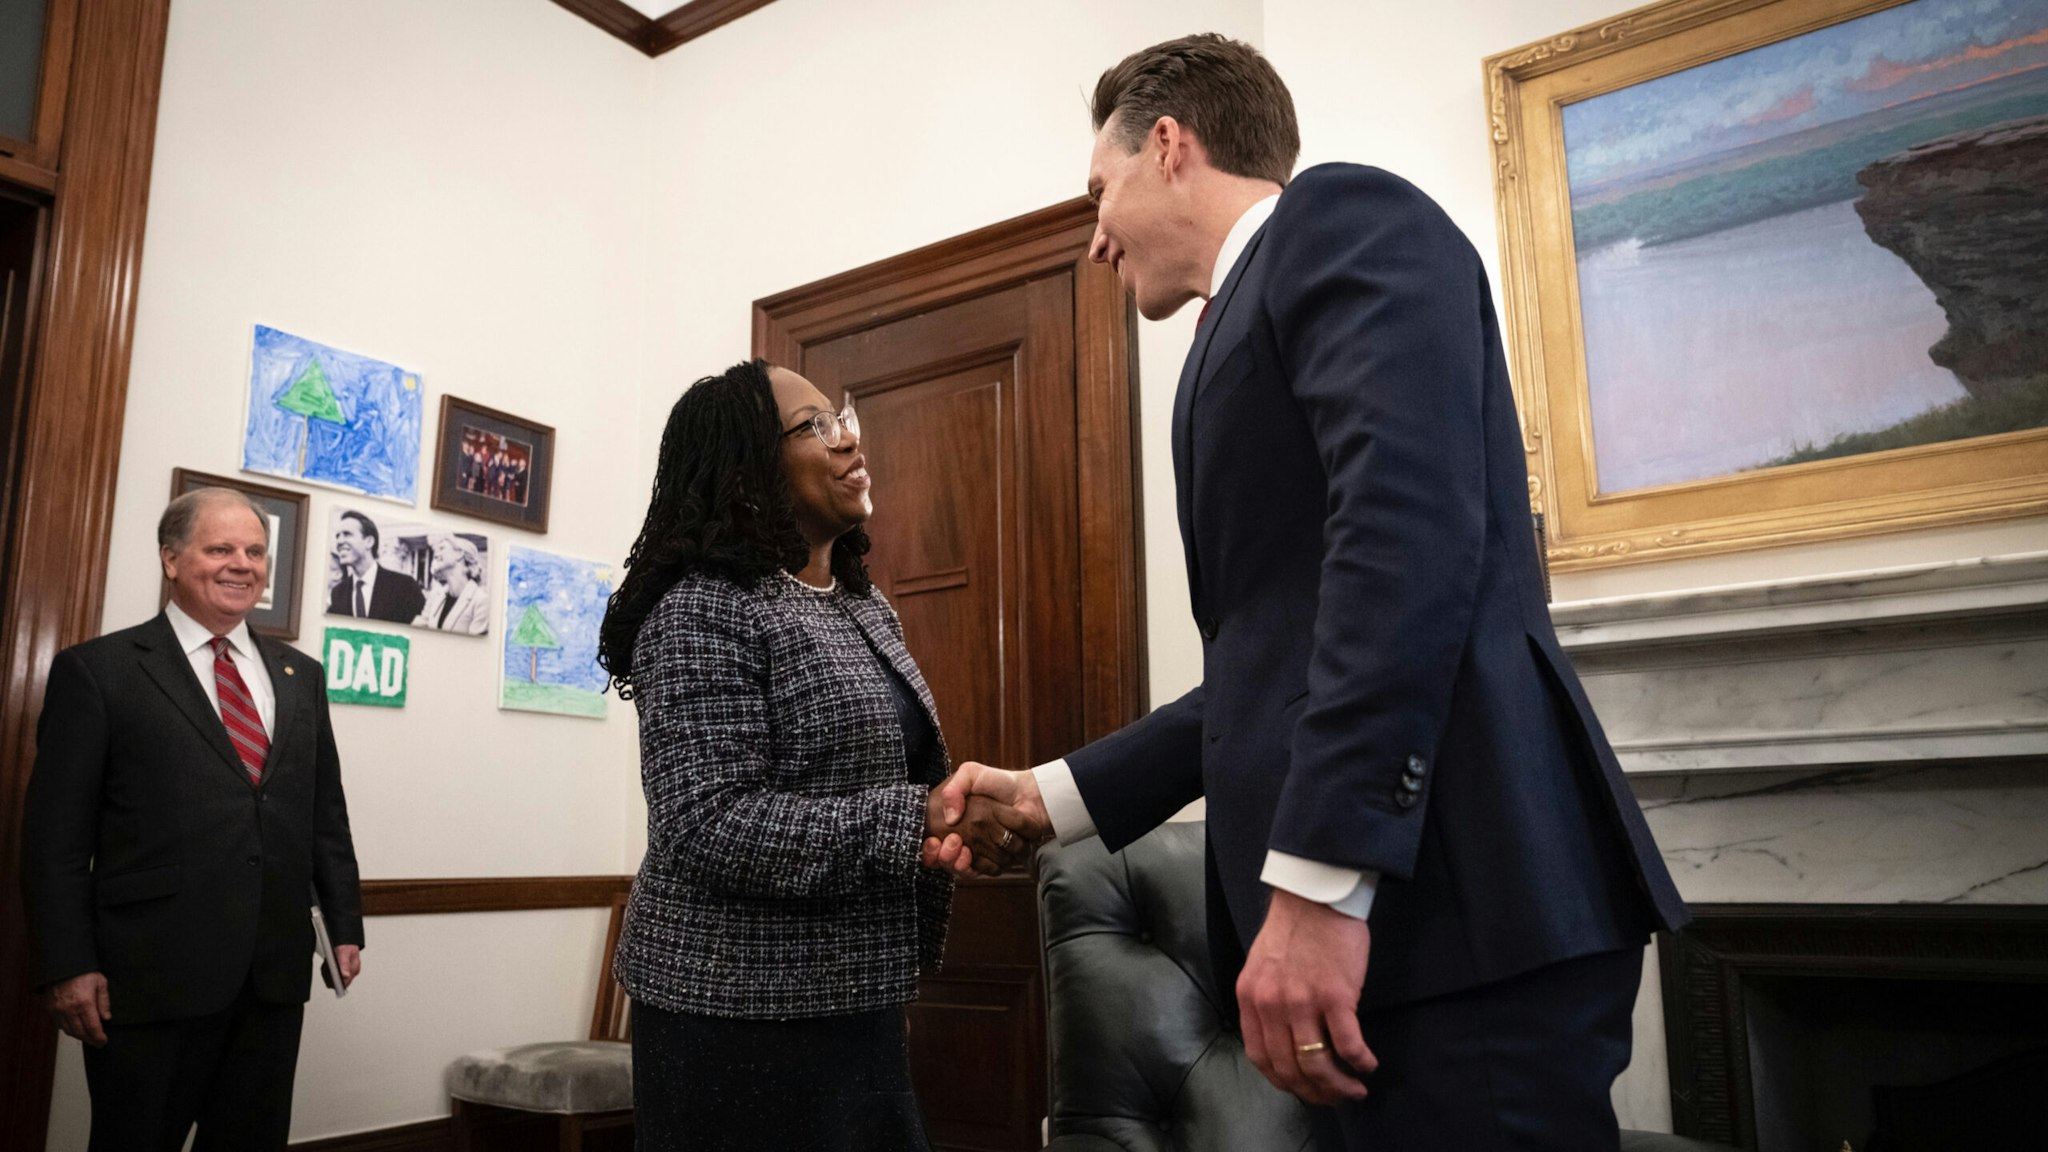 Sen. Josh Hawley (R-MO) greets Supreme Court Nominee Ketanji Brown Jackson as she arrives at his office for a meeting on Capitol Hill March 9, 2022 in Washington, DC.